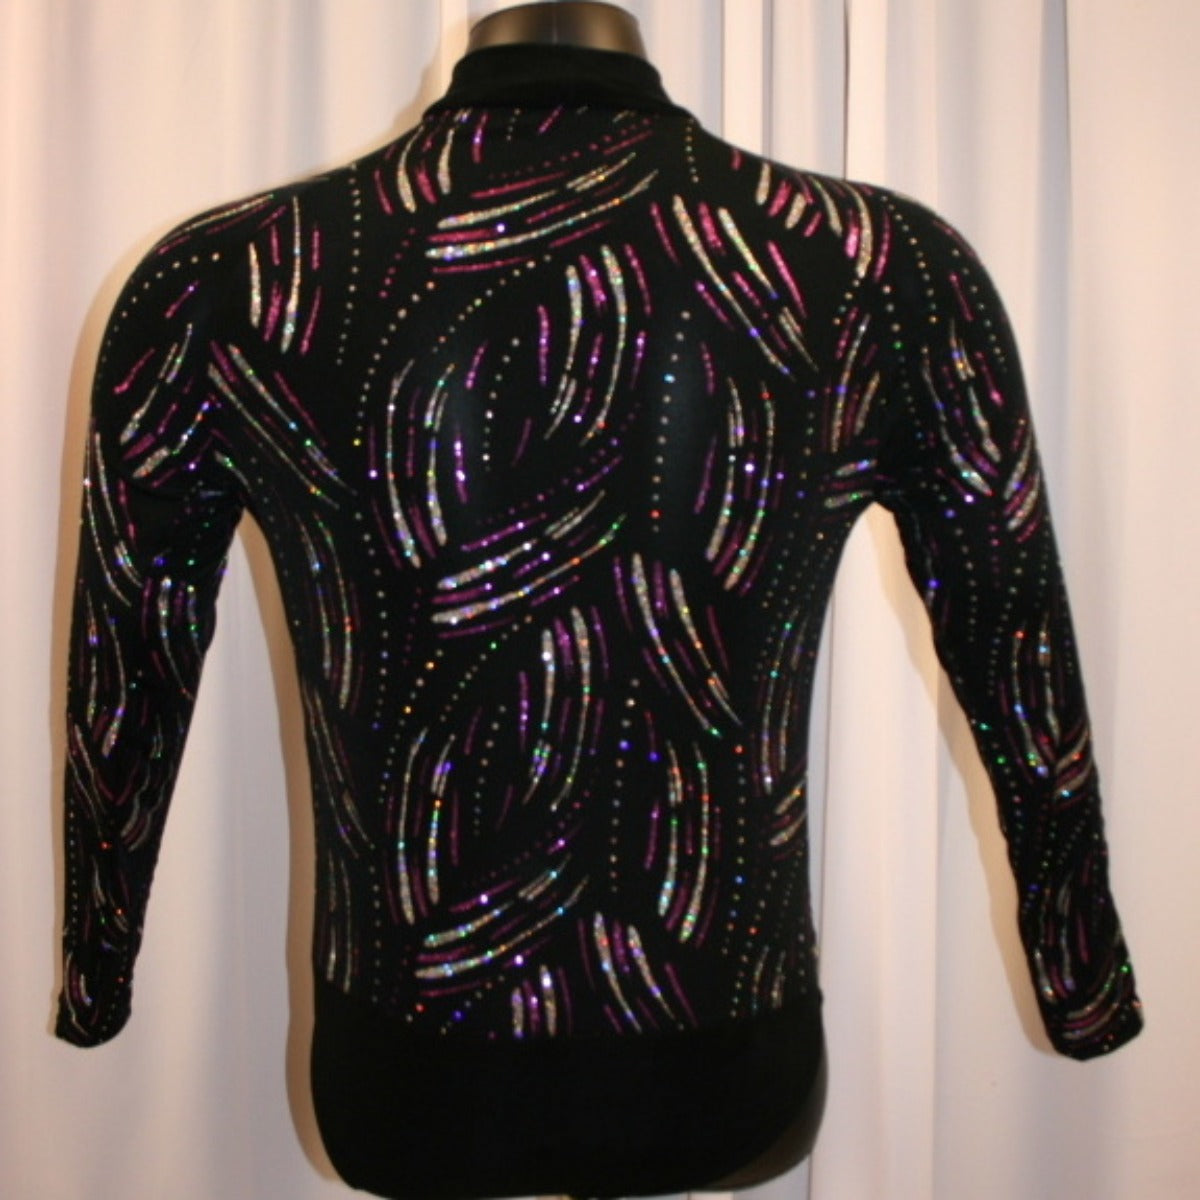 Crystal's Creations back view of men's black Latin shirt with silver & fuchsia glitter